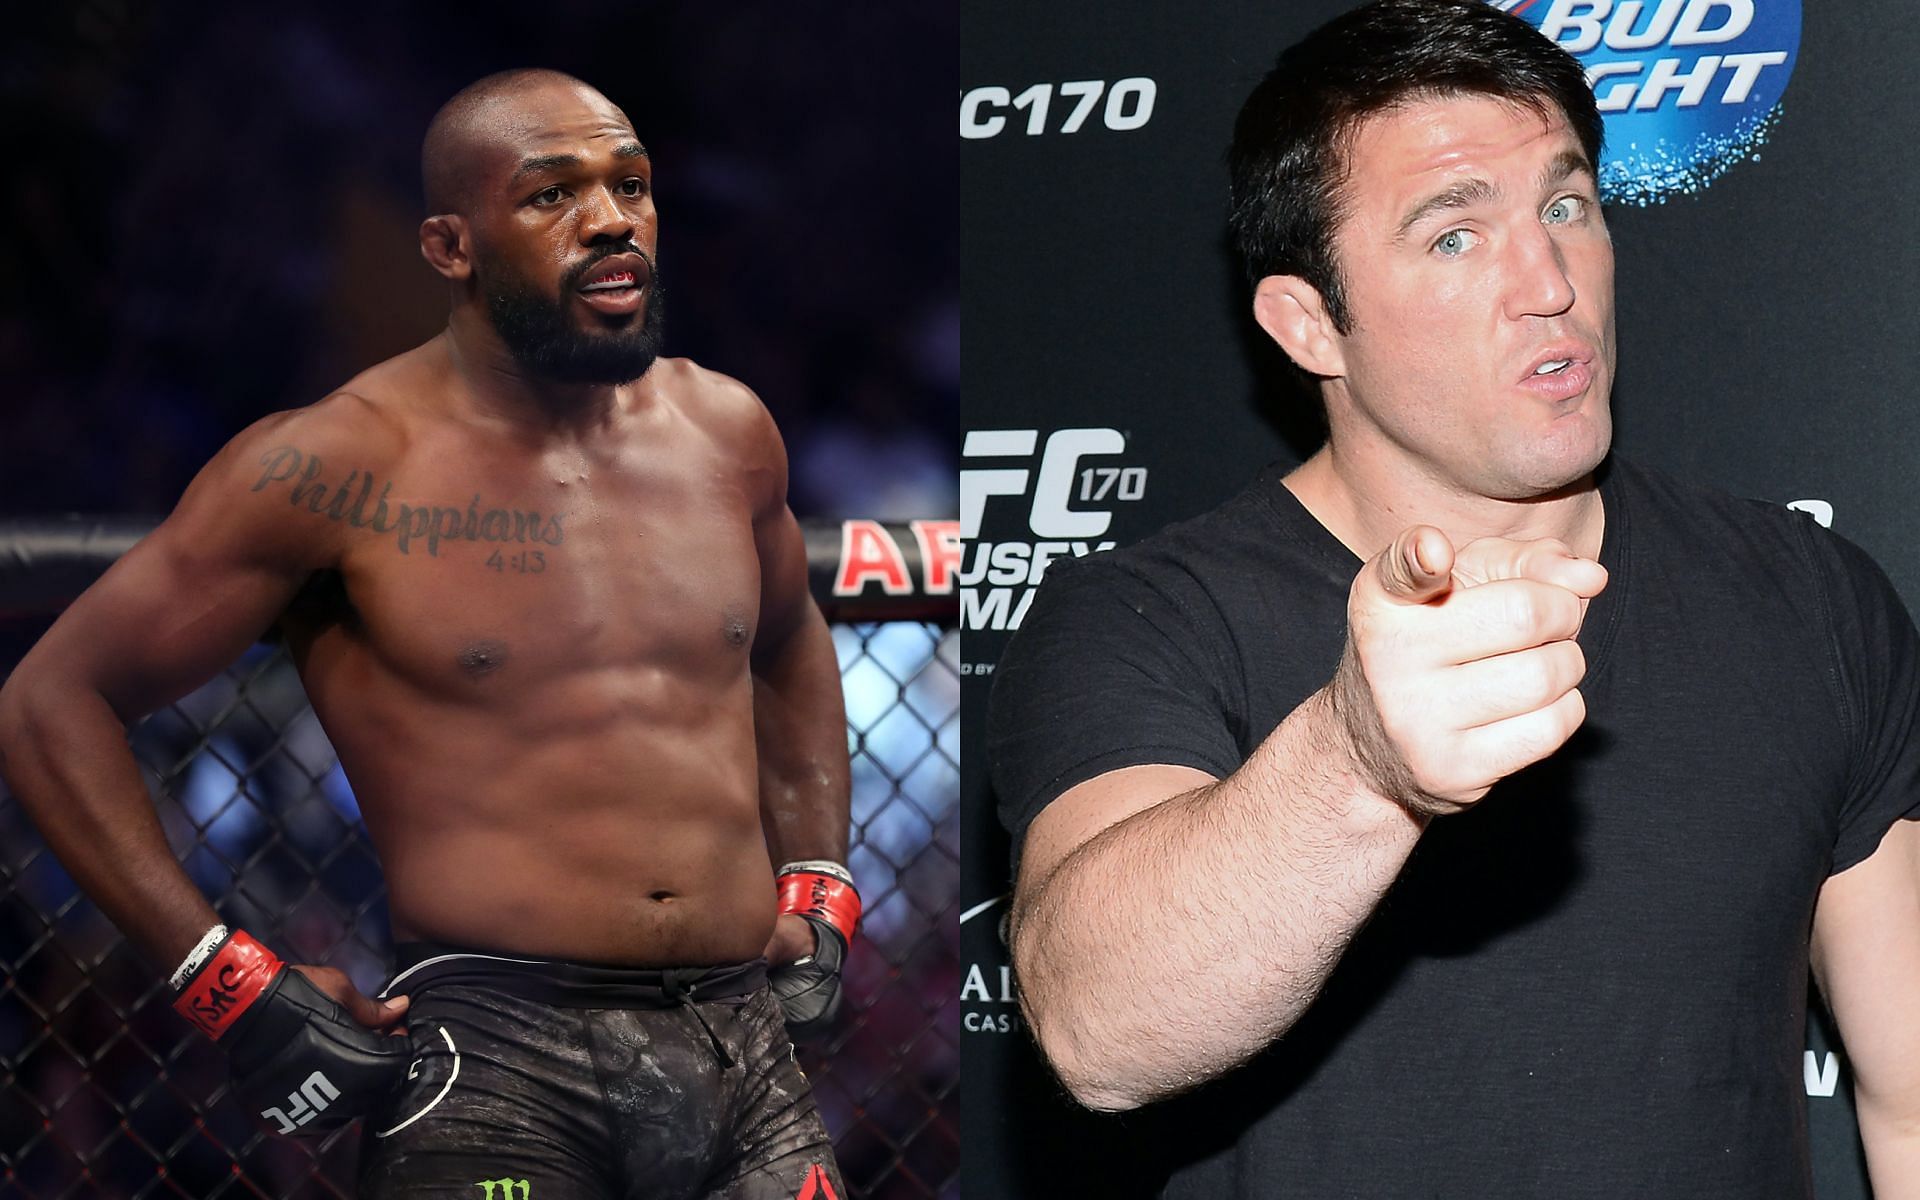 Jon Jones (left) and Chael Sonnen (right) [Image courtesy: Getty Images ]